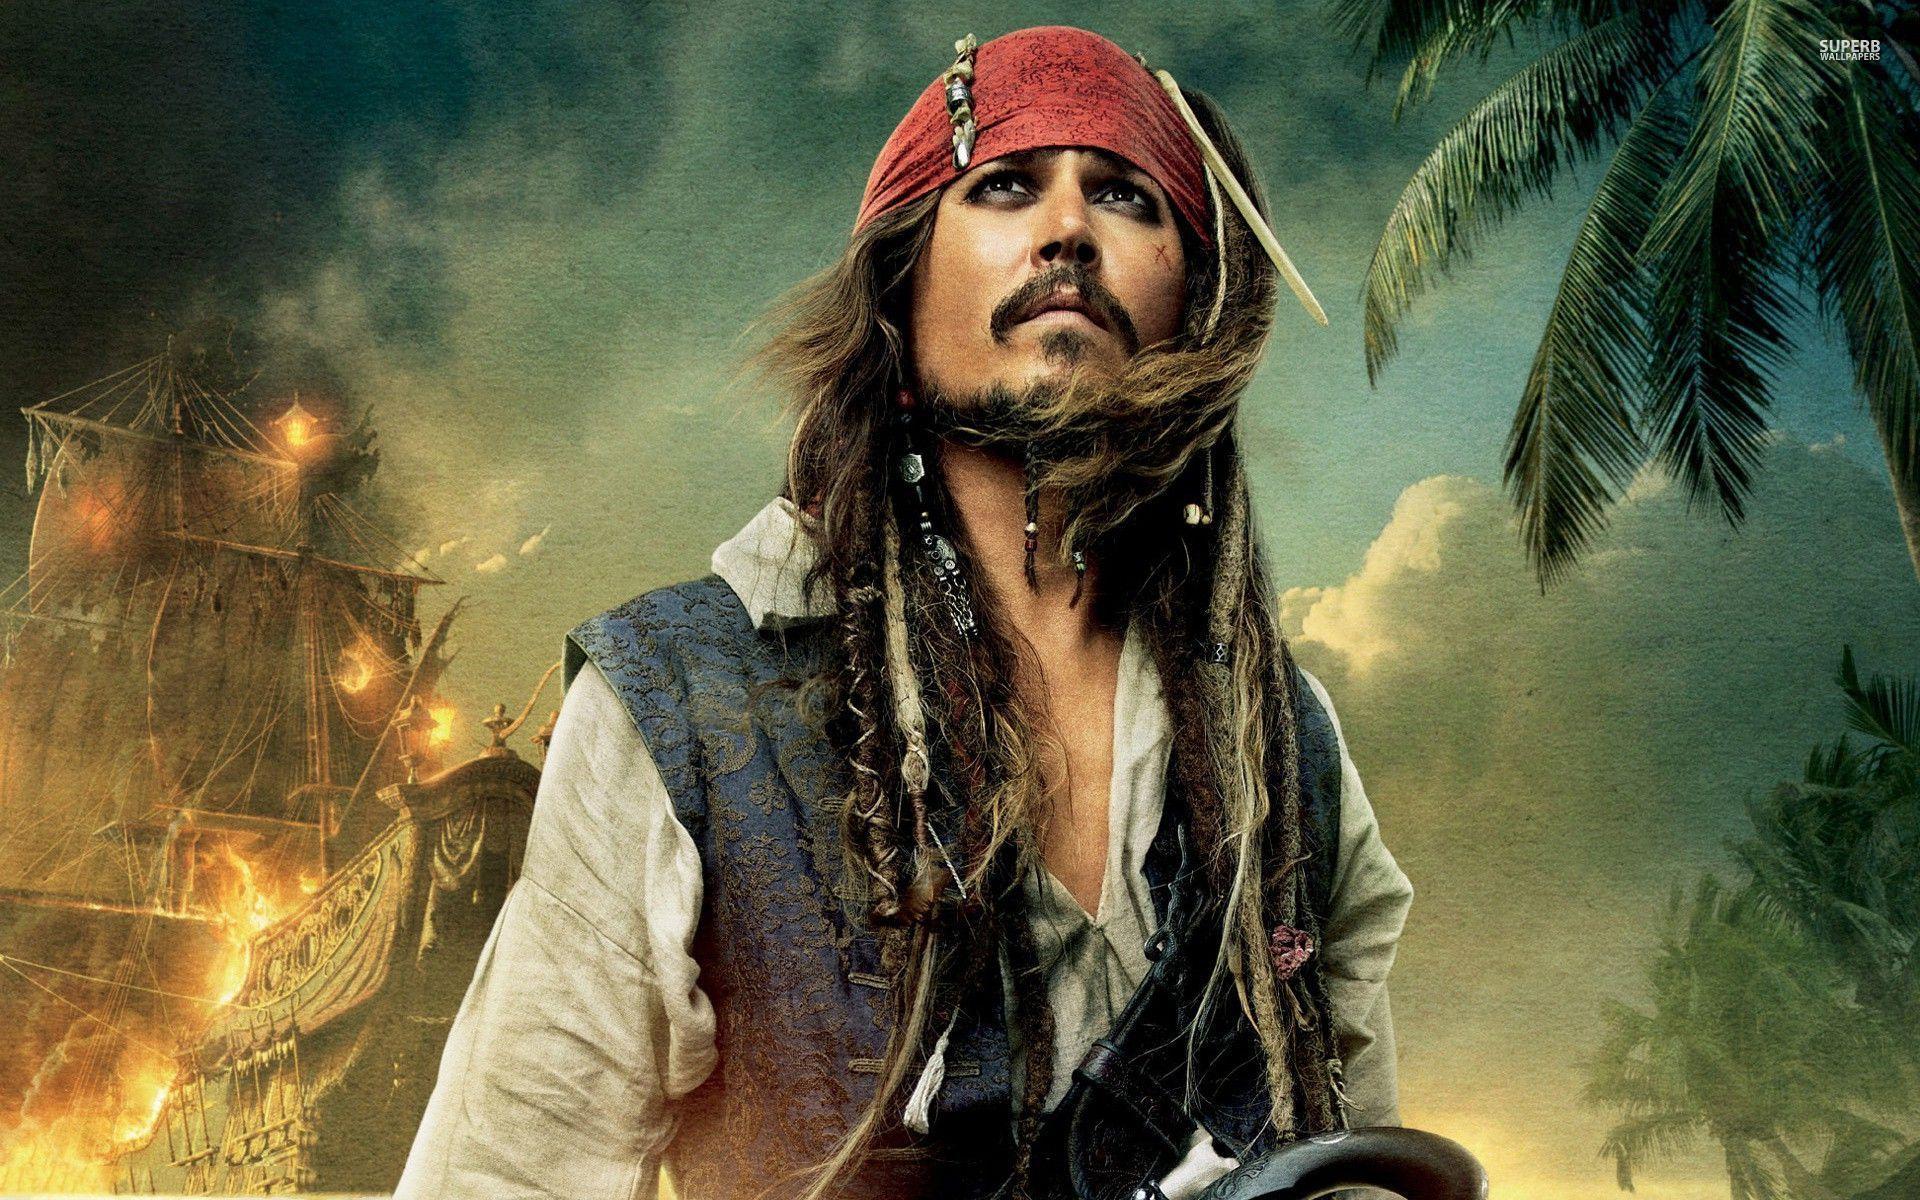  pirates of the caribbean x movie wallpaper 